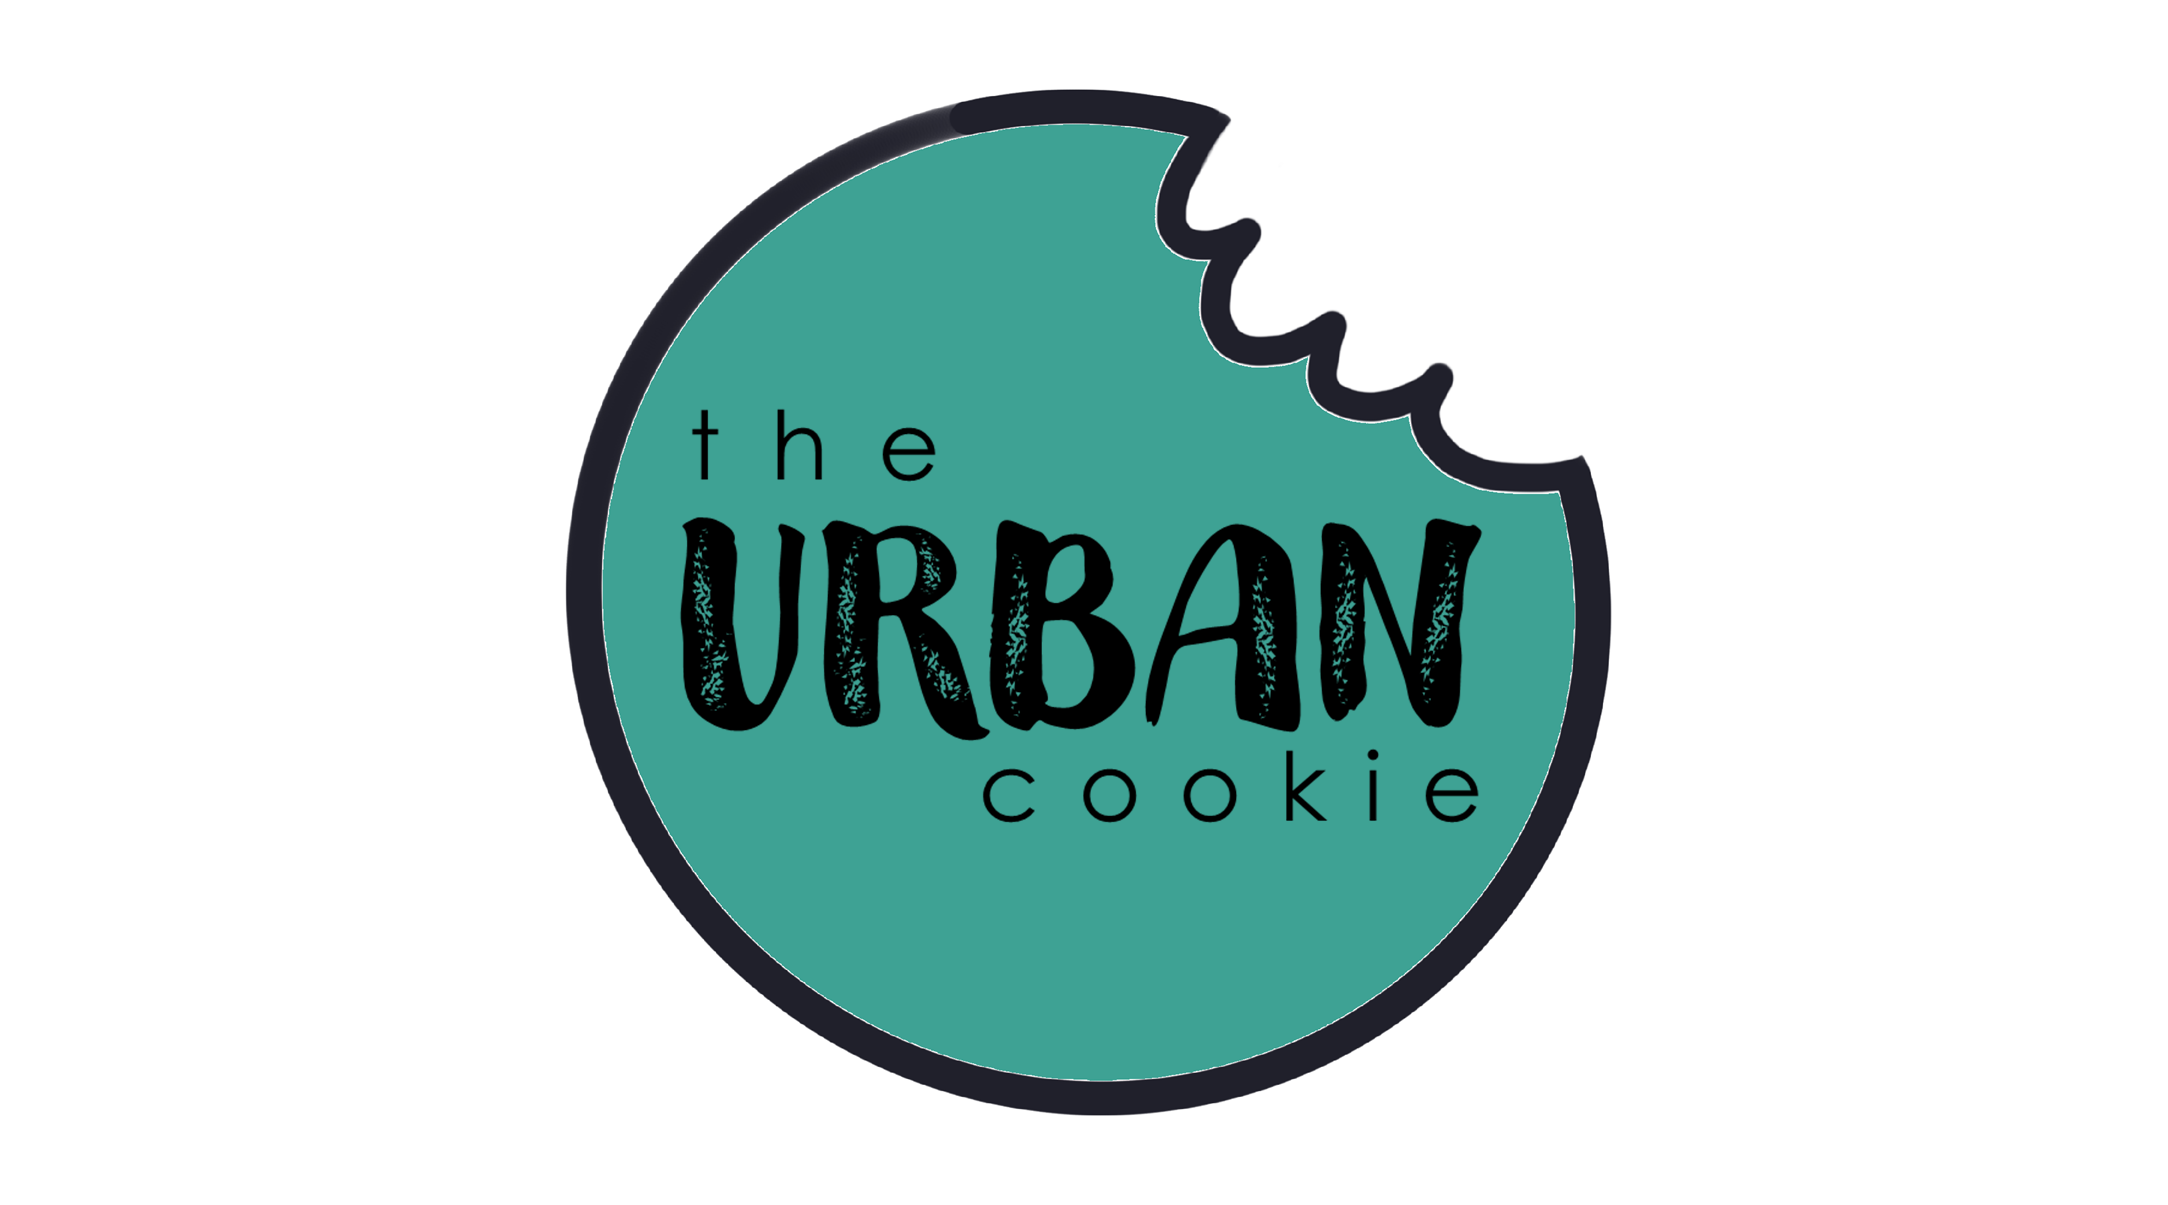 Undeniably Delicious - The Urban Cookie